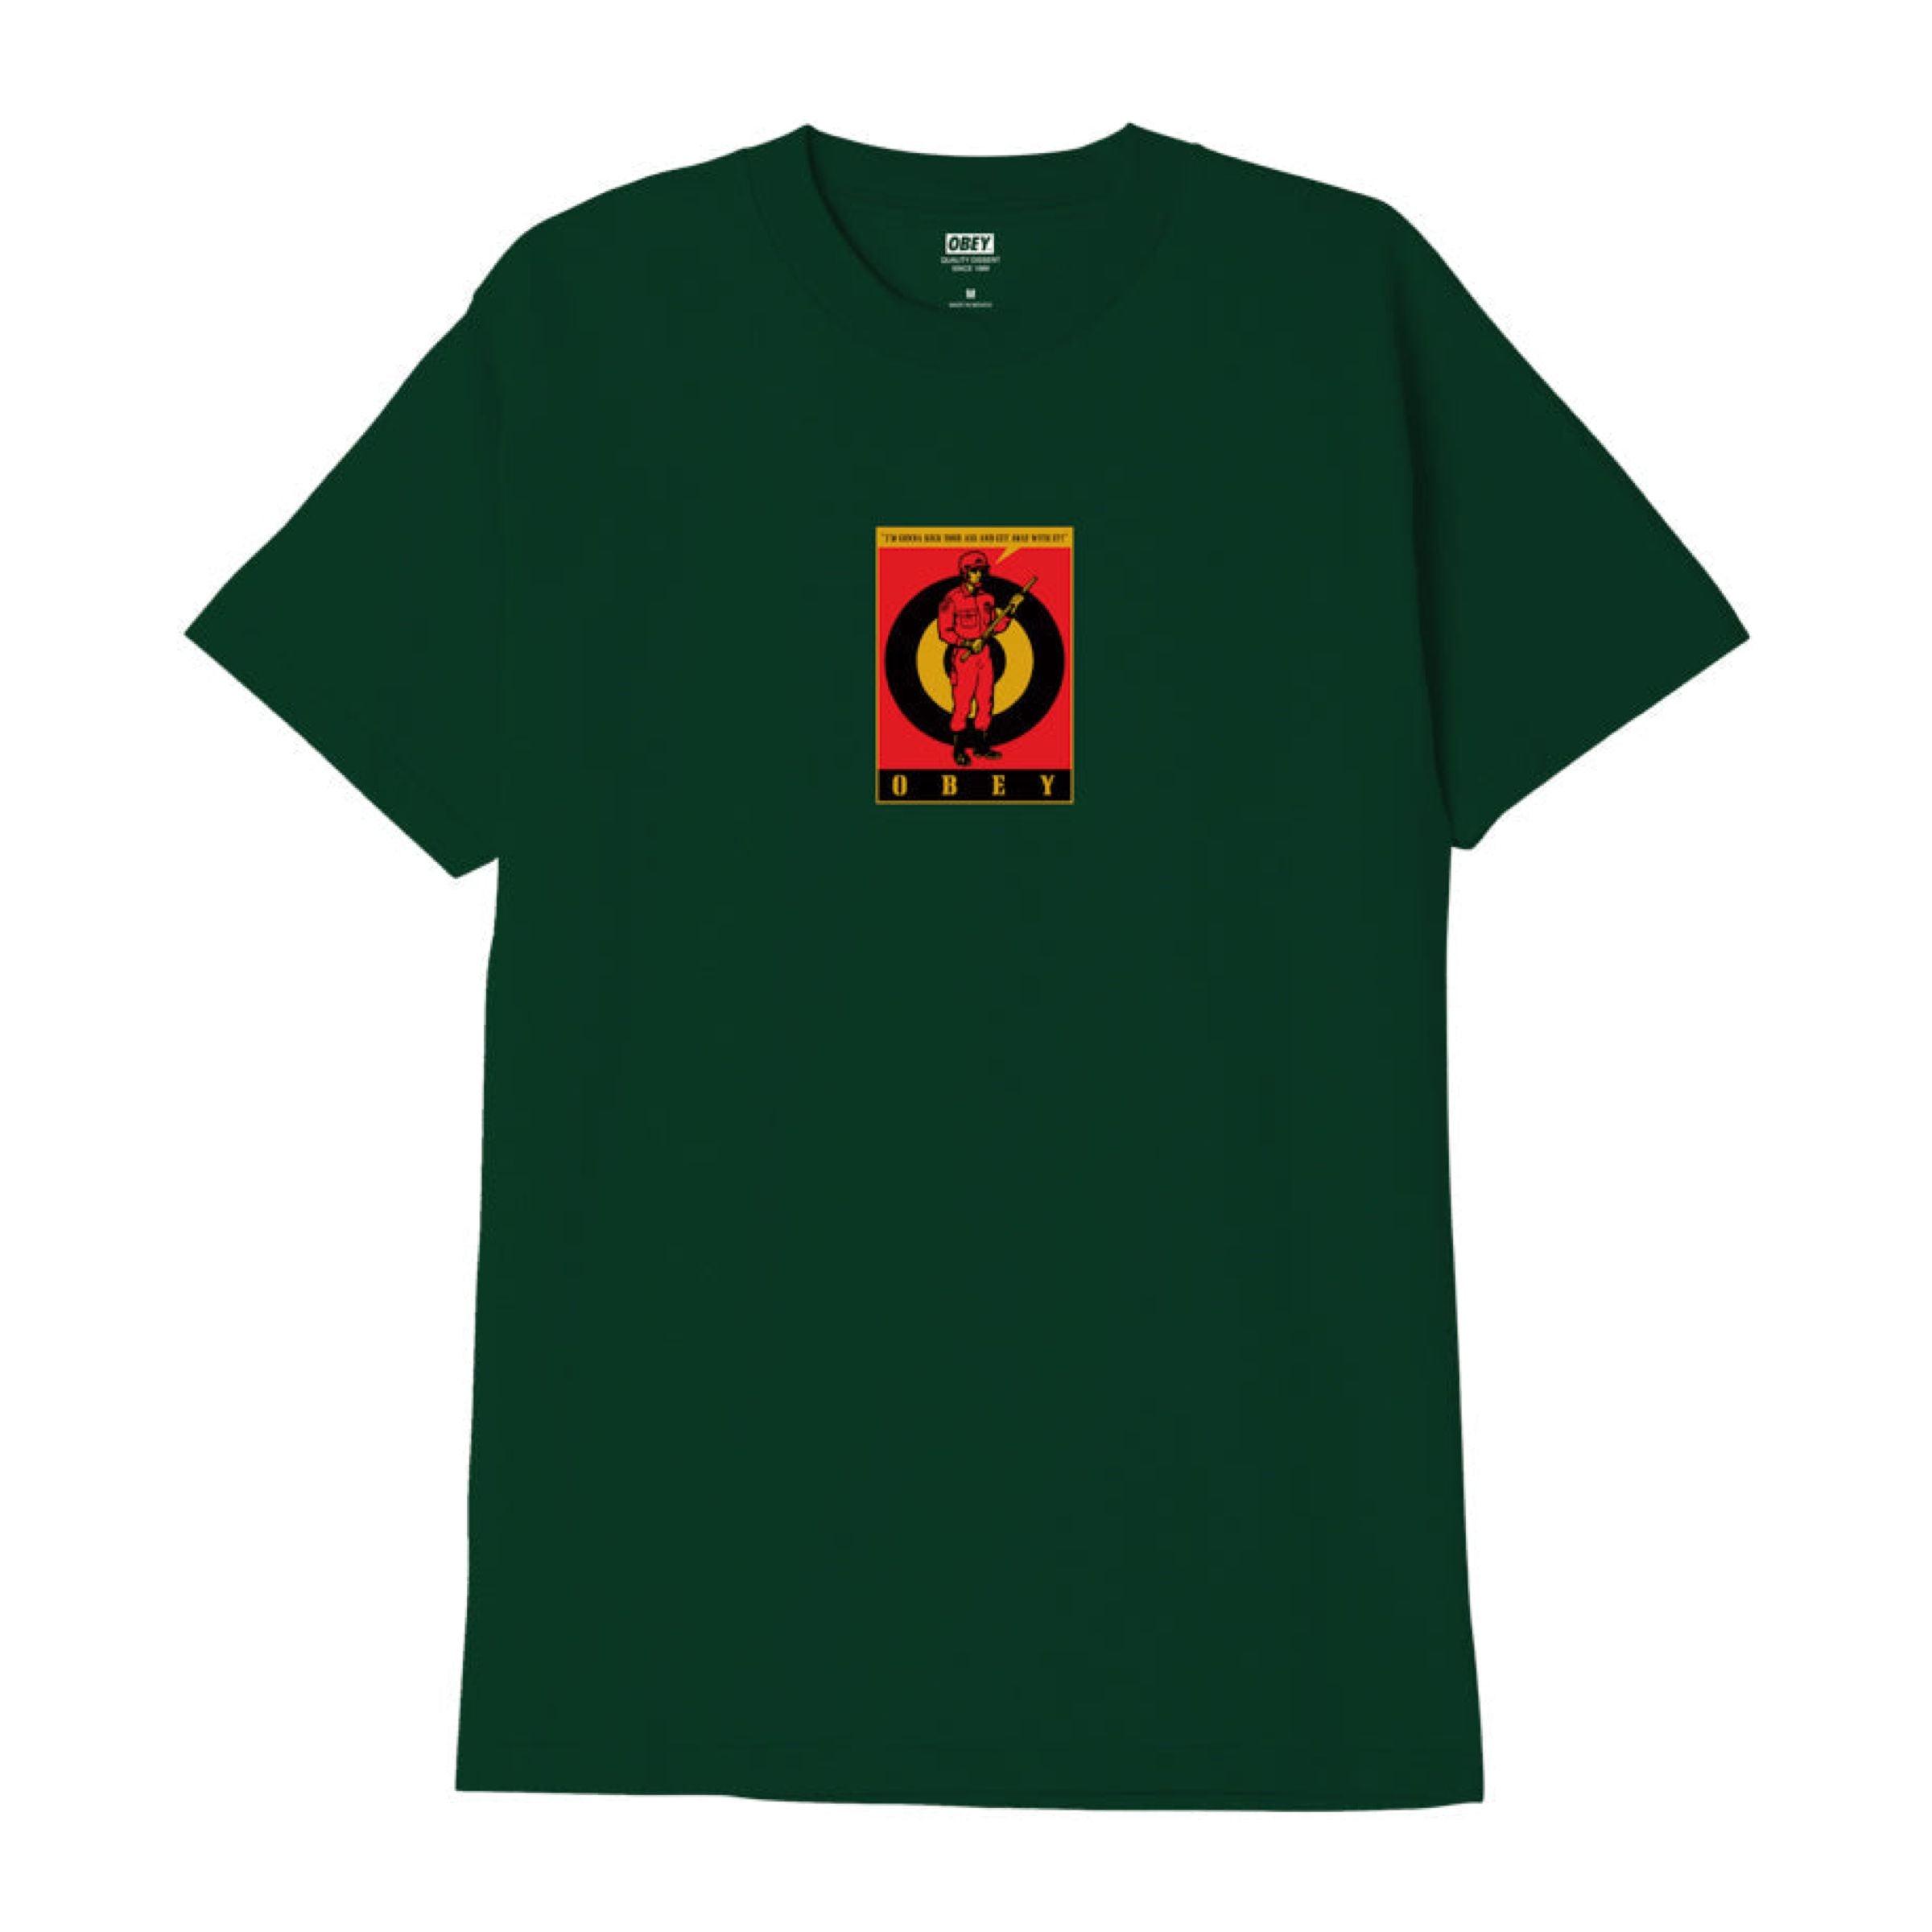 Obey | T-shirt Riot Cop Uomo Forest Green - Fabbrica Ski Sises